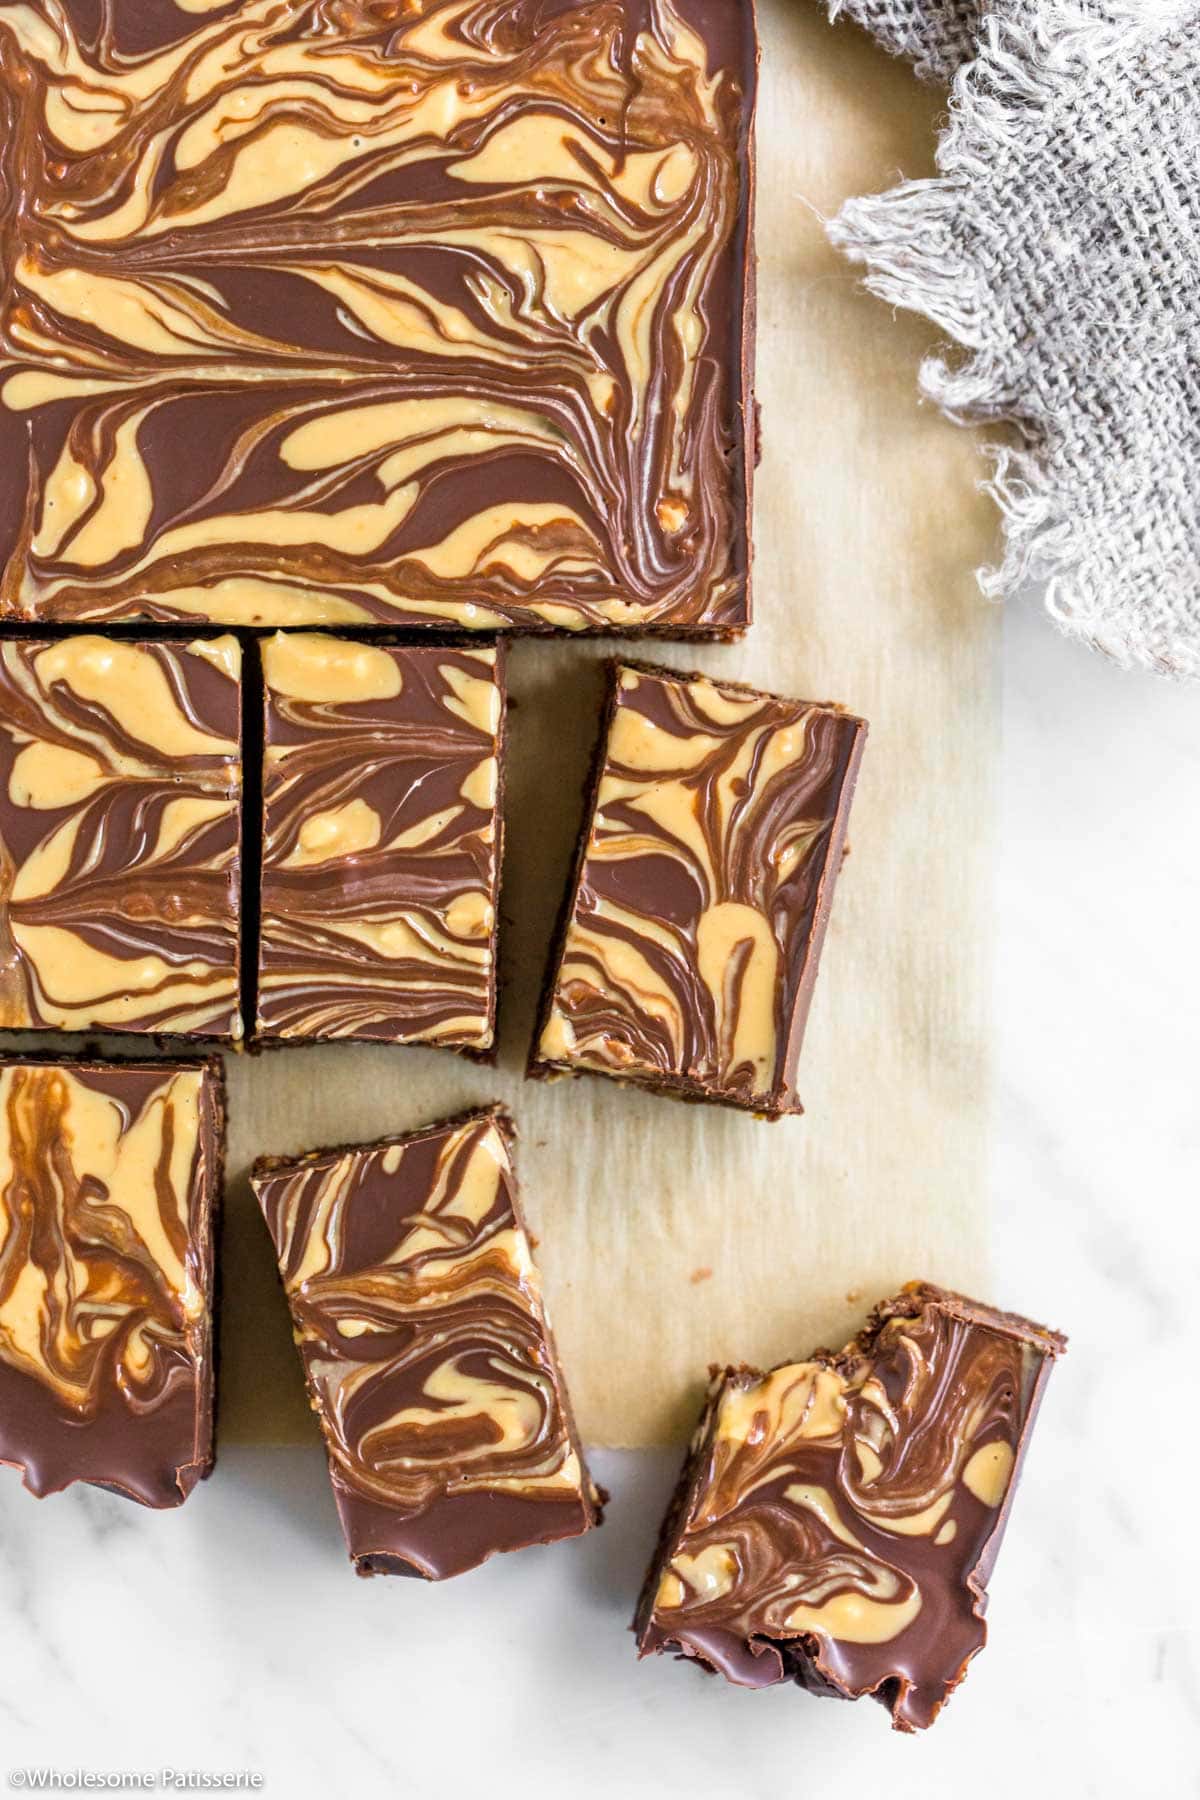 Peanut butter no bake brownies sliced and sitting on parchment paper lined board.